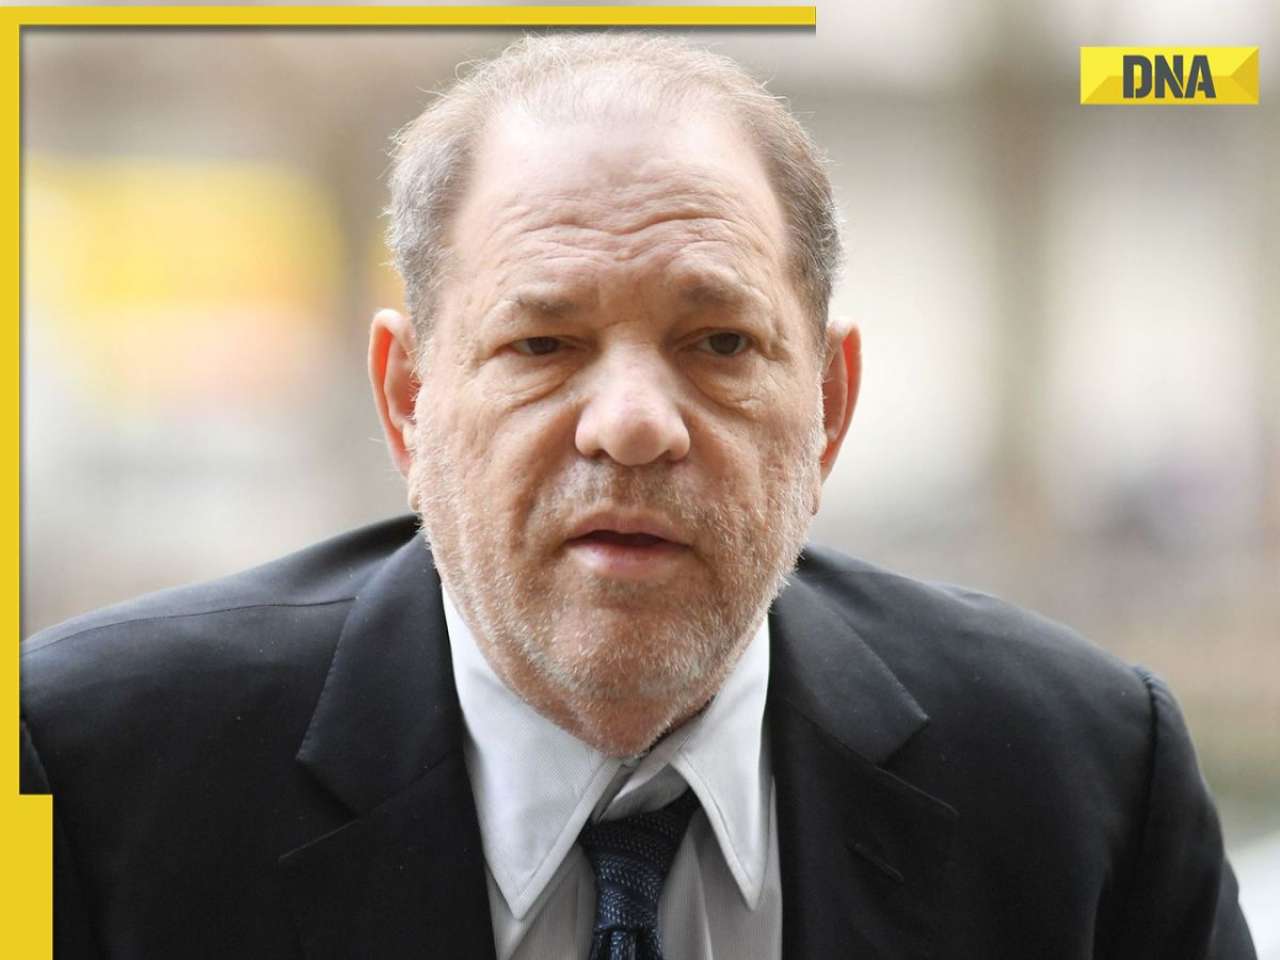 Harvey Weinstein's rape conviction in 2020 #MeToo case overturned by New York court